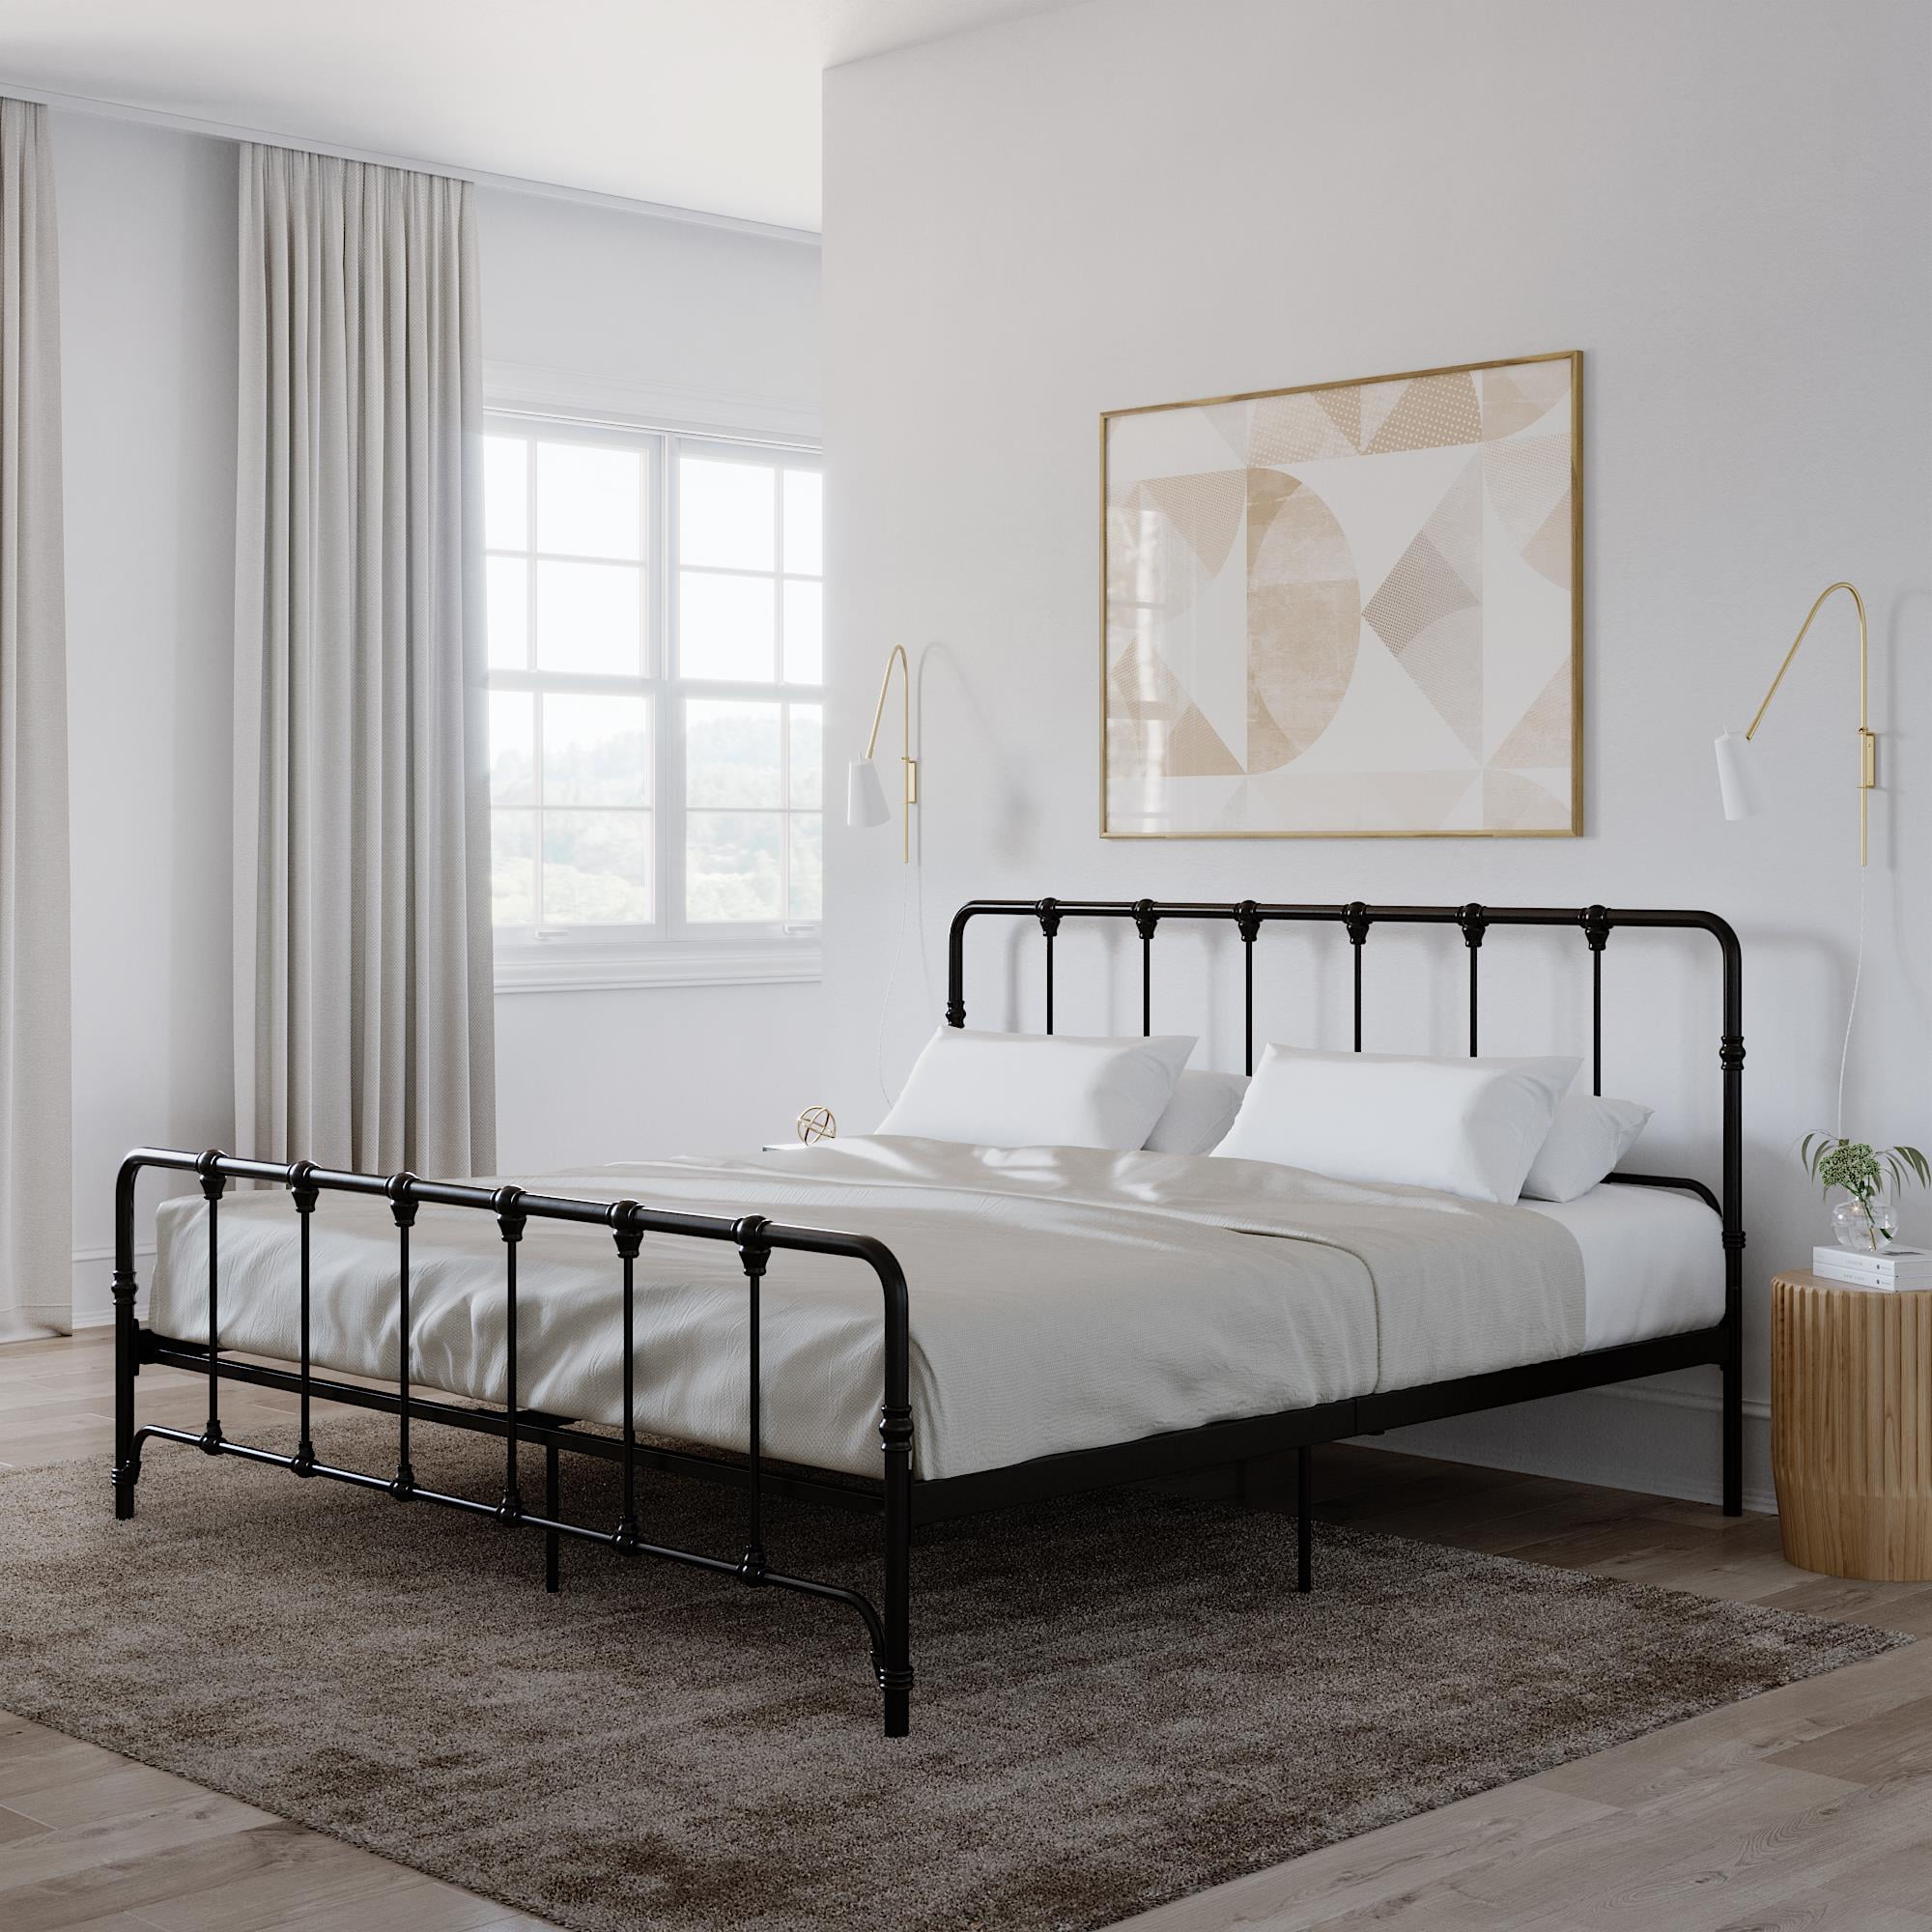 Mainstays Farmhouse Metal Bed King, How To Put Together A Metal Bed Frame King Size